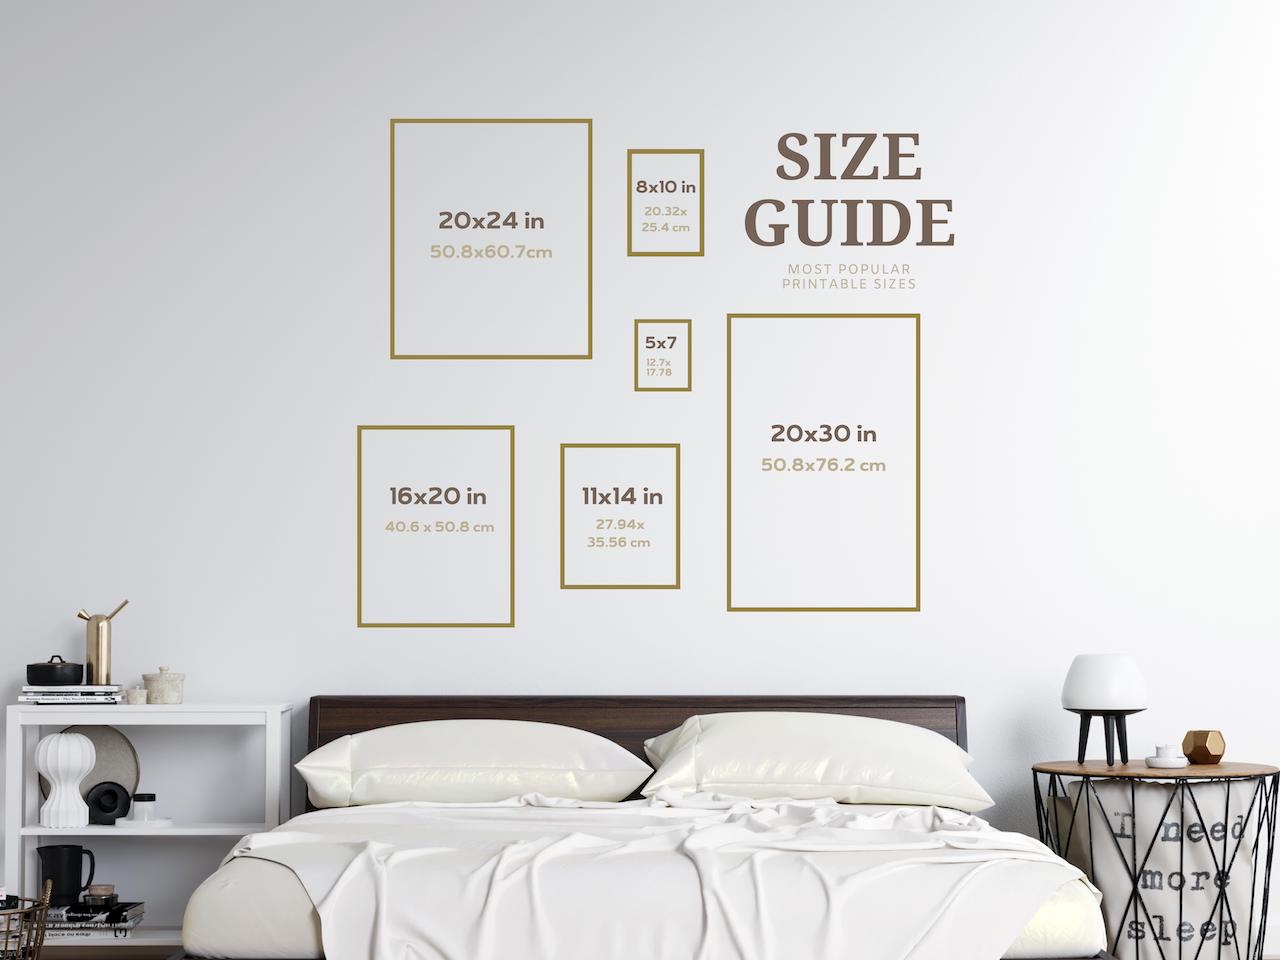 Use this guide to deign your bedroom wall